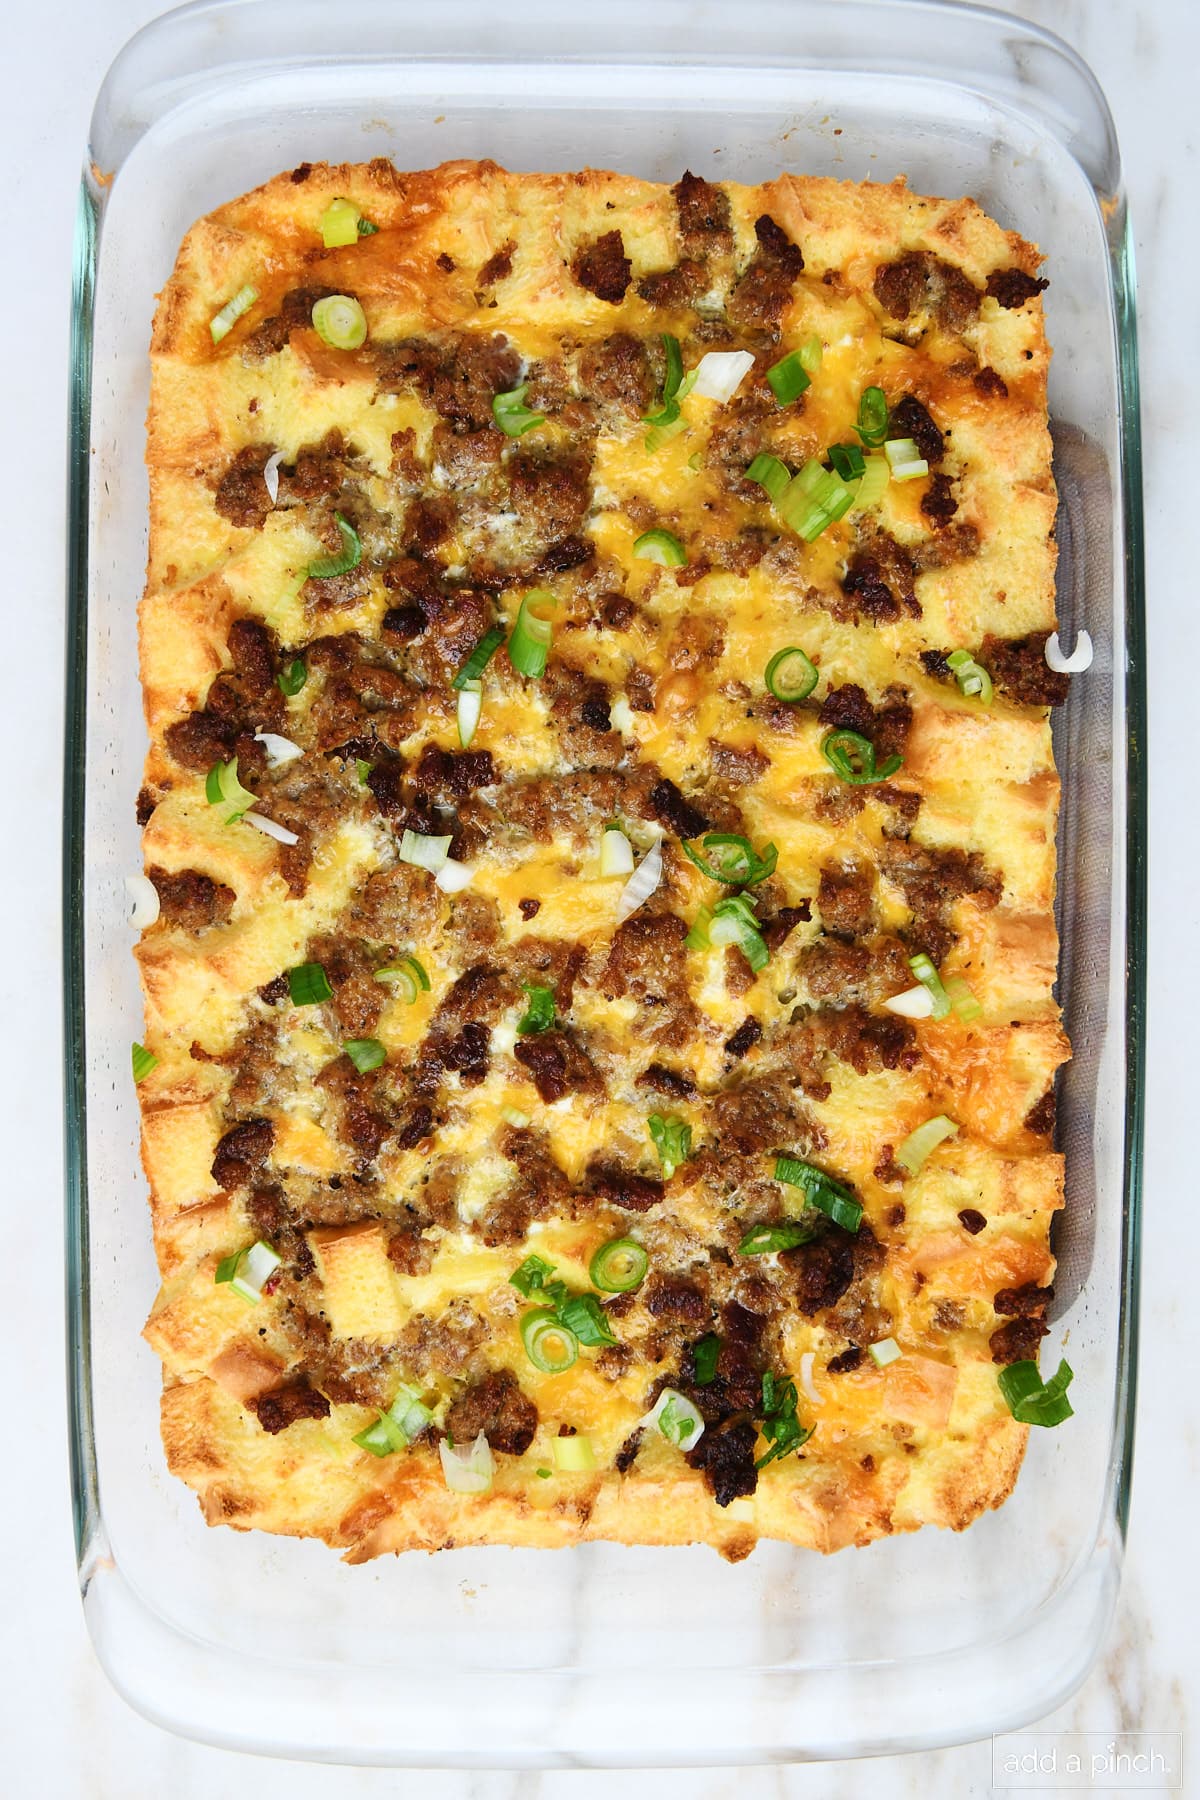 Baked breakfast casserole topped with sliced green onions ready to serve. 